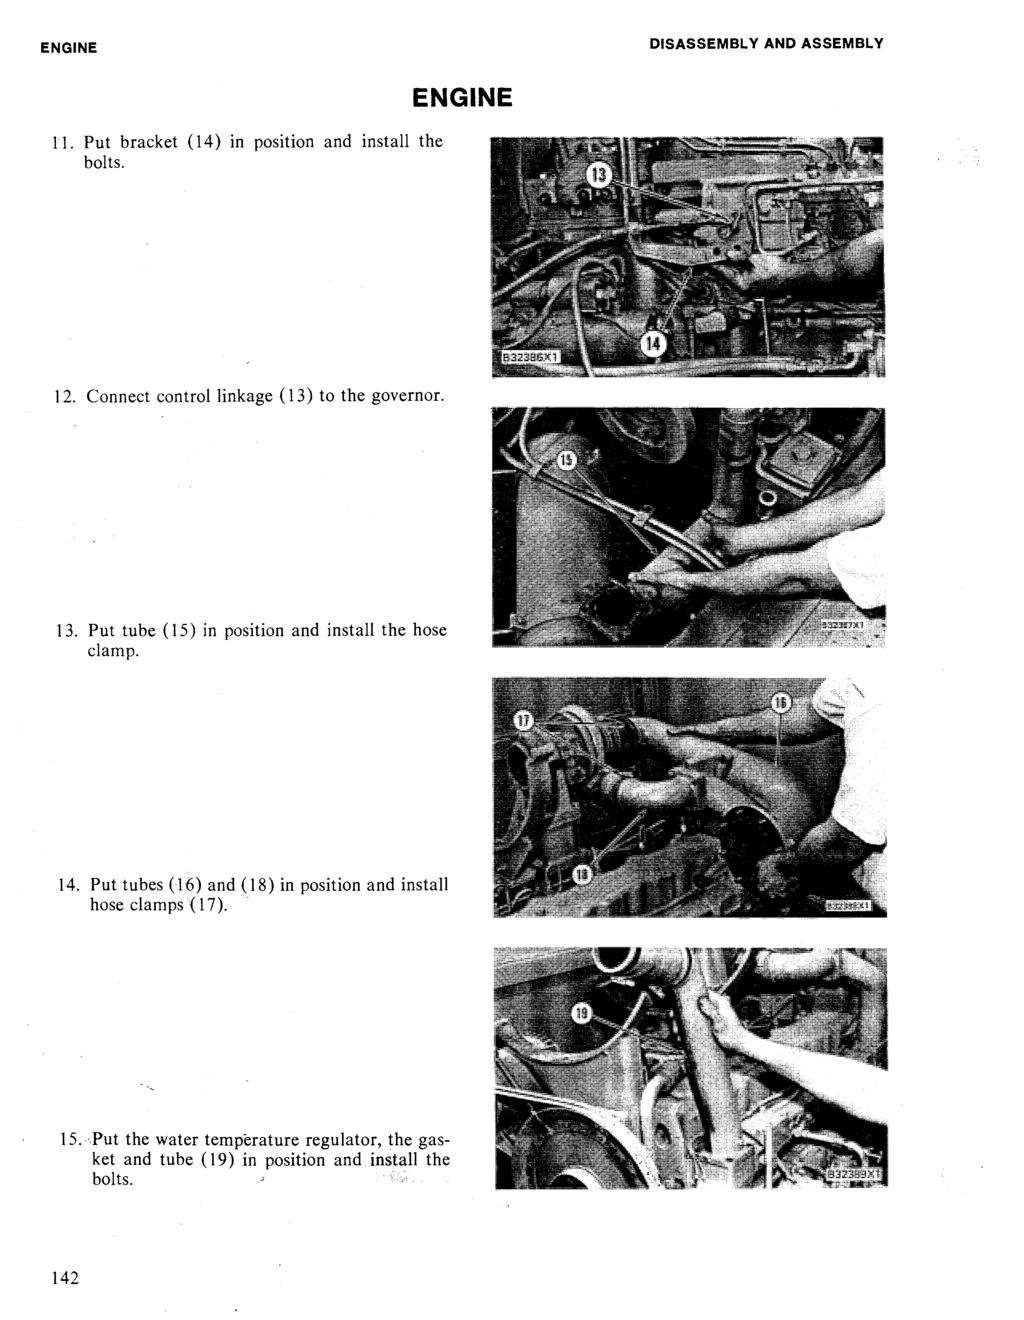 ENGINE DISASSEMBLY AND ASSEMBLY 1'1. Put bracket (14) in position and install the bolts. ENGINE 12. Connect control linkage (13) to the governor. 13.